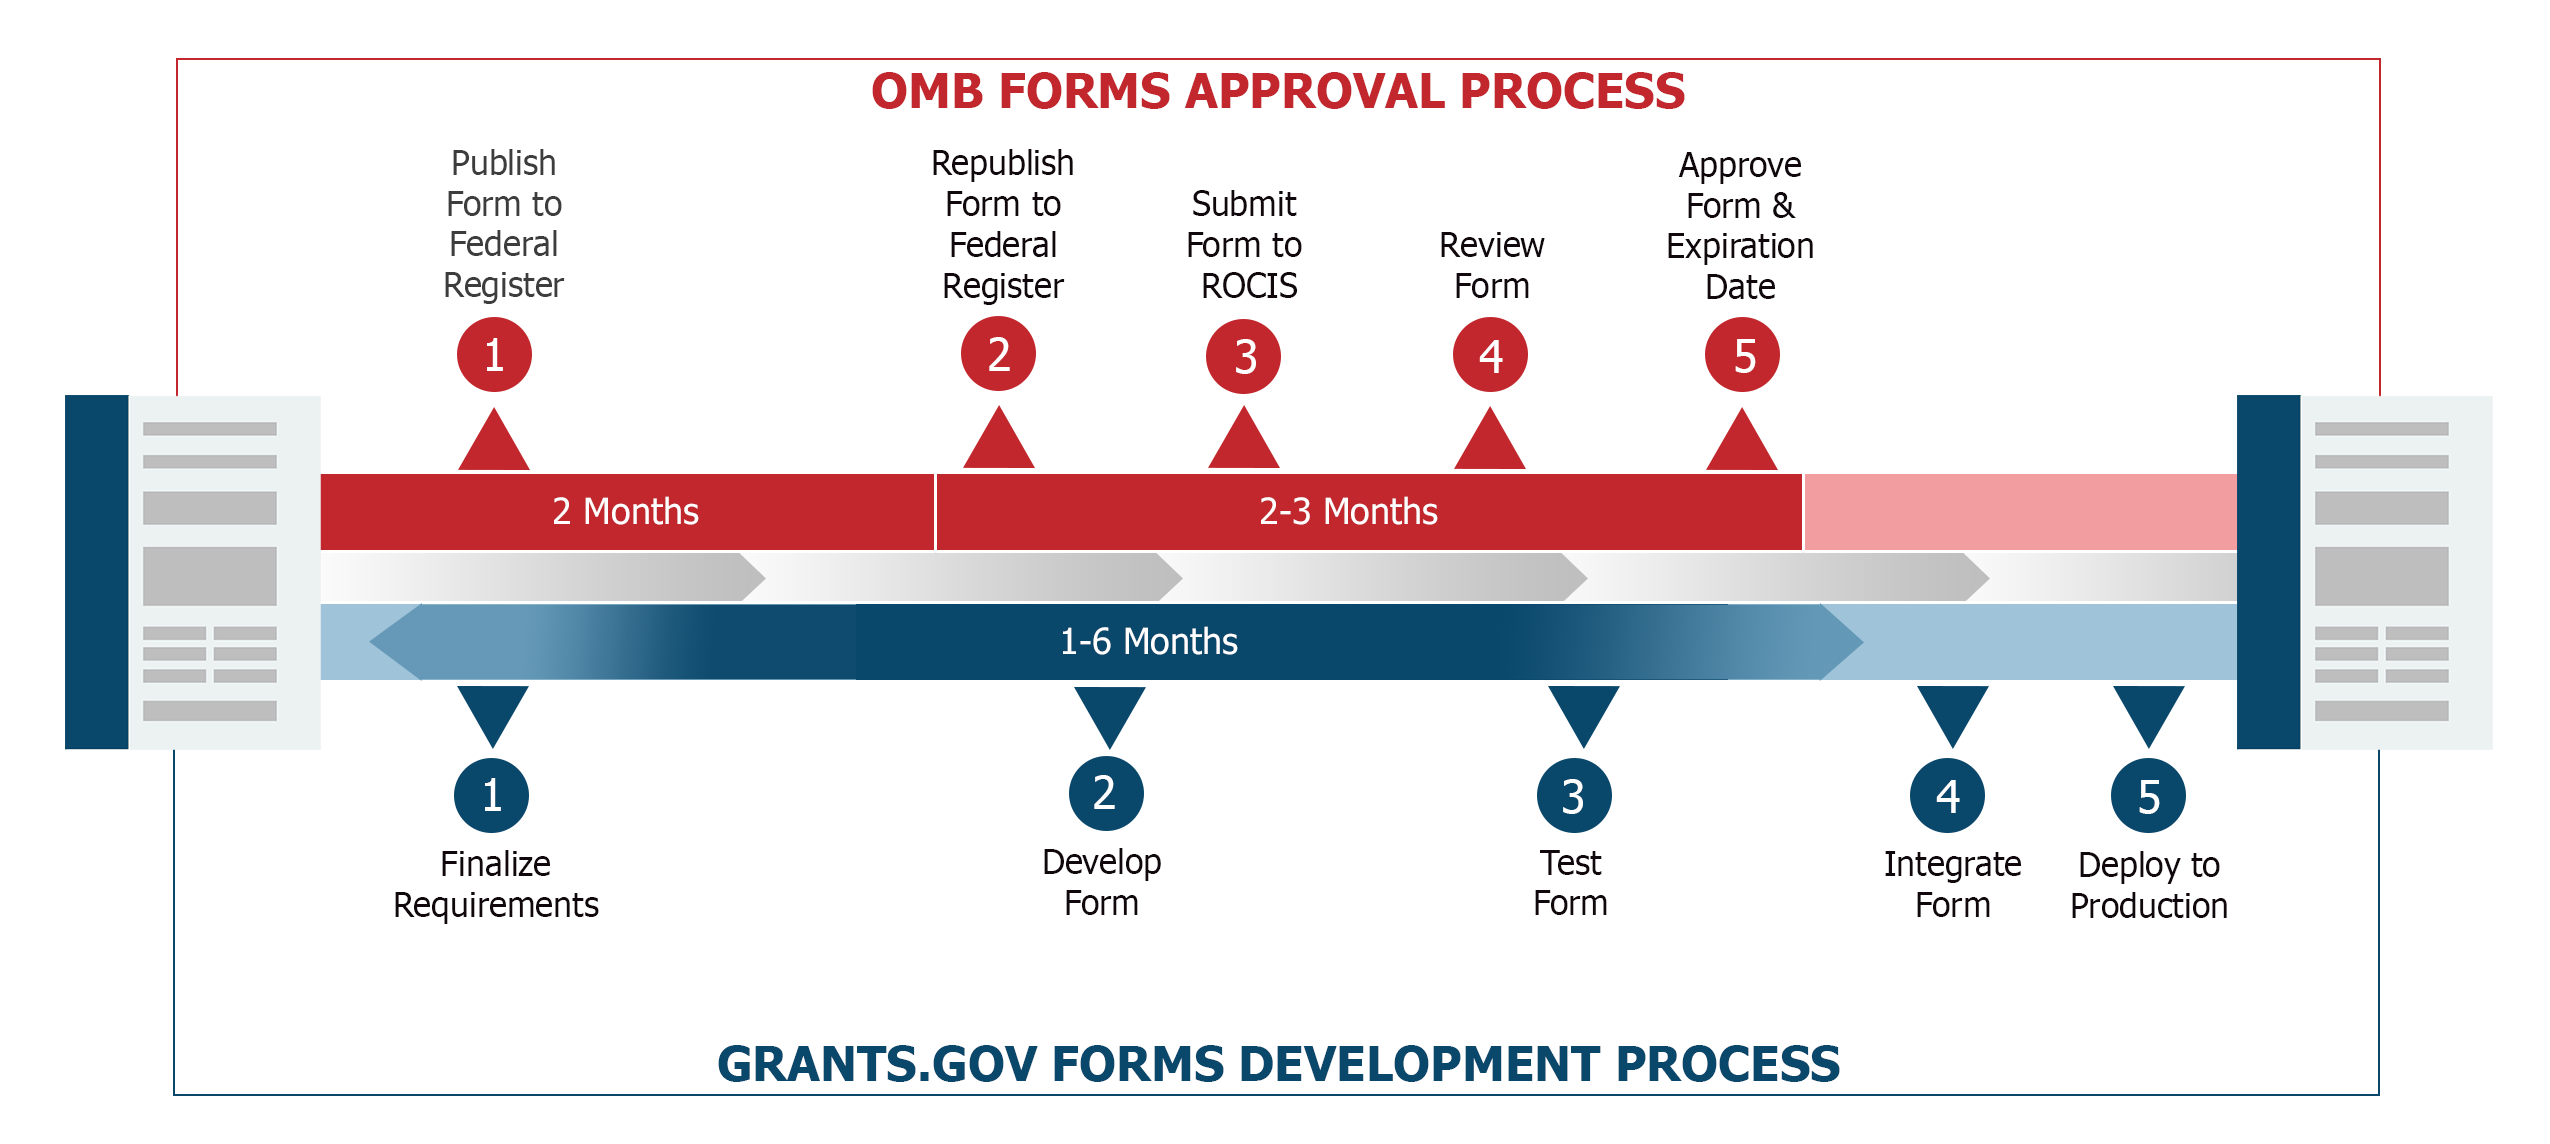 Grants.gov Forms Approval and Development Processes